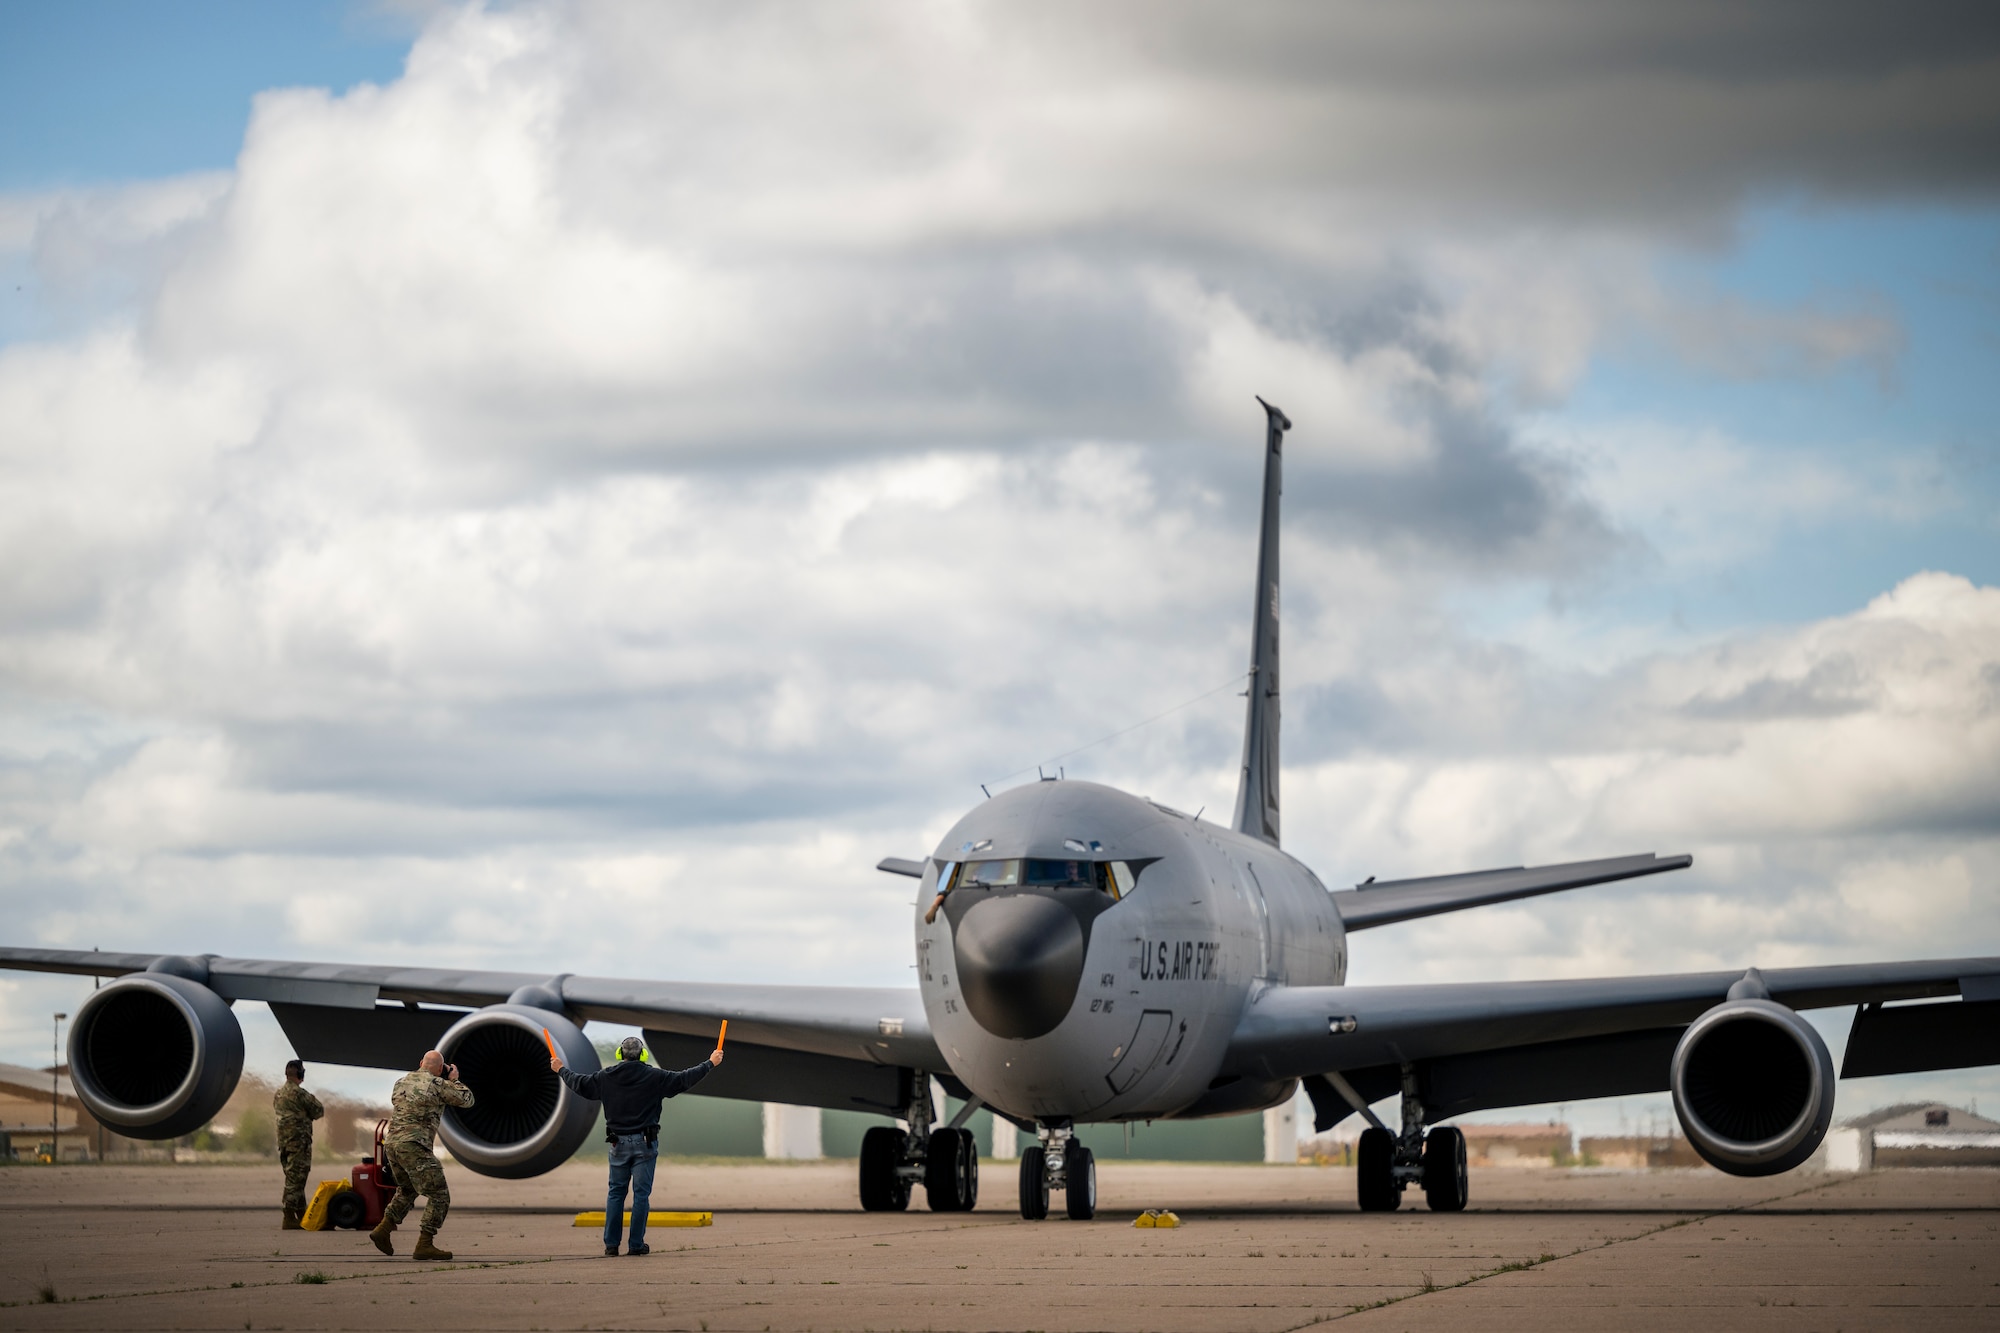 A U.S. Air Force KC-135 Stratotanker from the 191st Air Refueling Group, Selfridge Air National Guard Base, Michigan,  arrives at Sawyer International Airport, Marquette, Michigan, to support Agile Combat Employment training as multicapable Airmen during the Northern Agility 22-1 exercise, June 27, 2022. Northern Agility 22-1 tests the rapid insertion of an Air Expeditionary Wing into a bare-base environment to establish logistics and communications and enhance the ability to operate in austere environments.